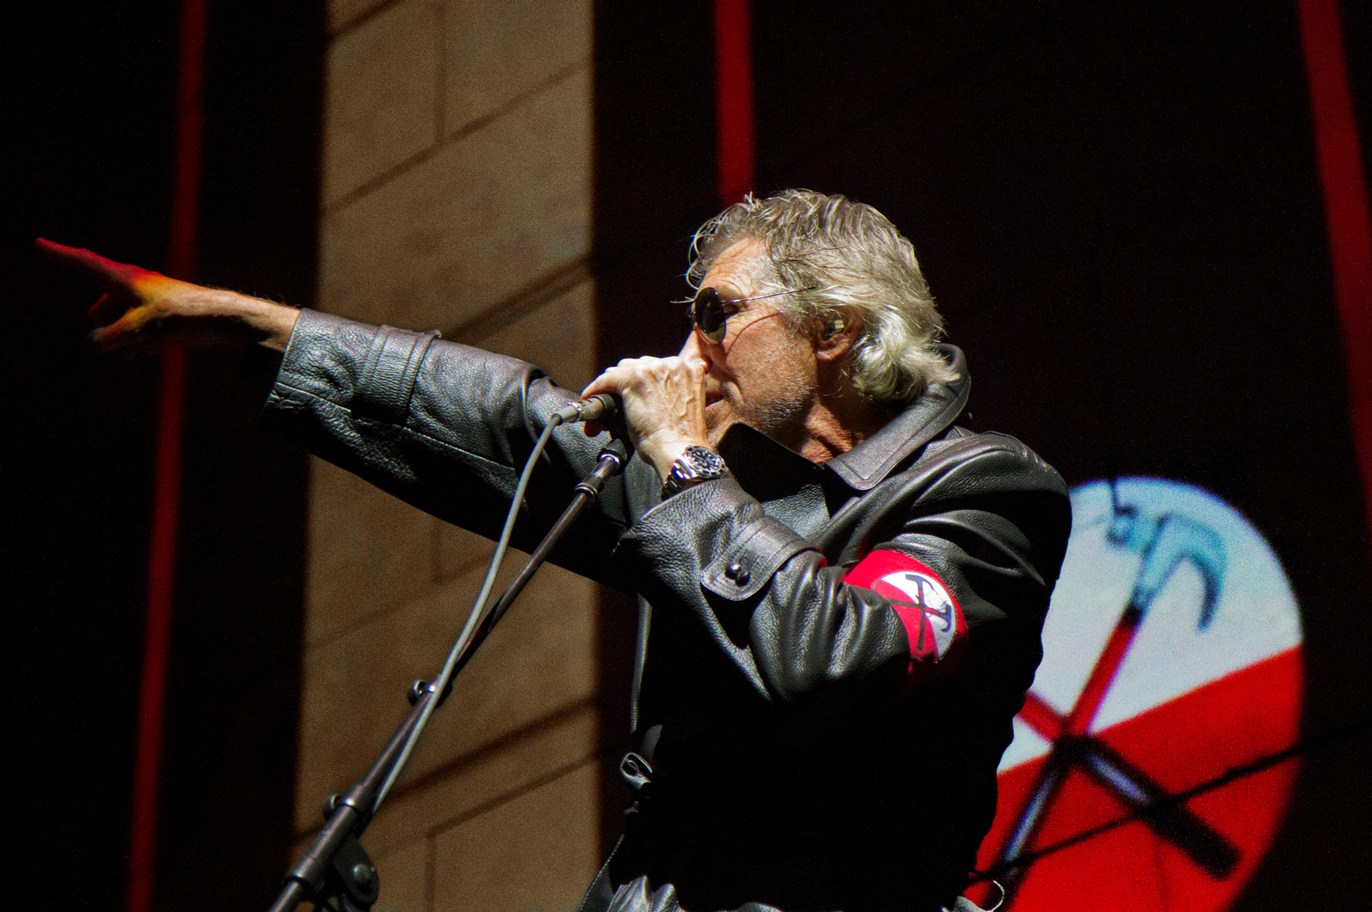 Don't miss Pink Floyd legend Roger Waters brings The Wall to Bucharest